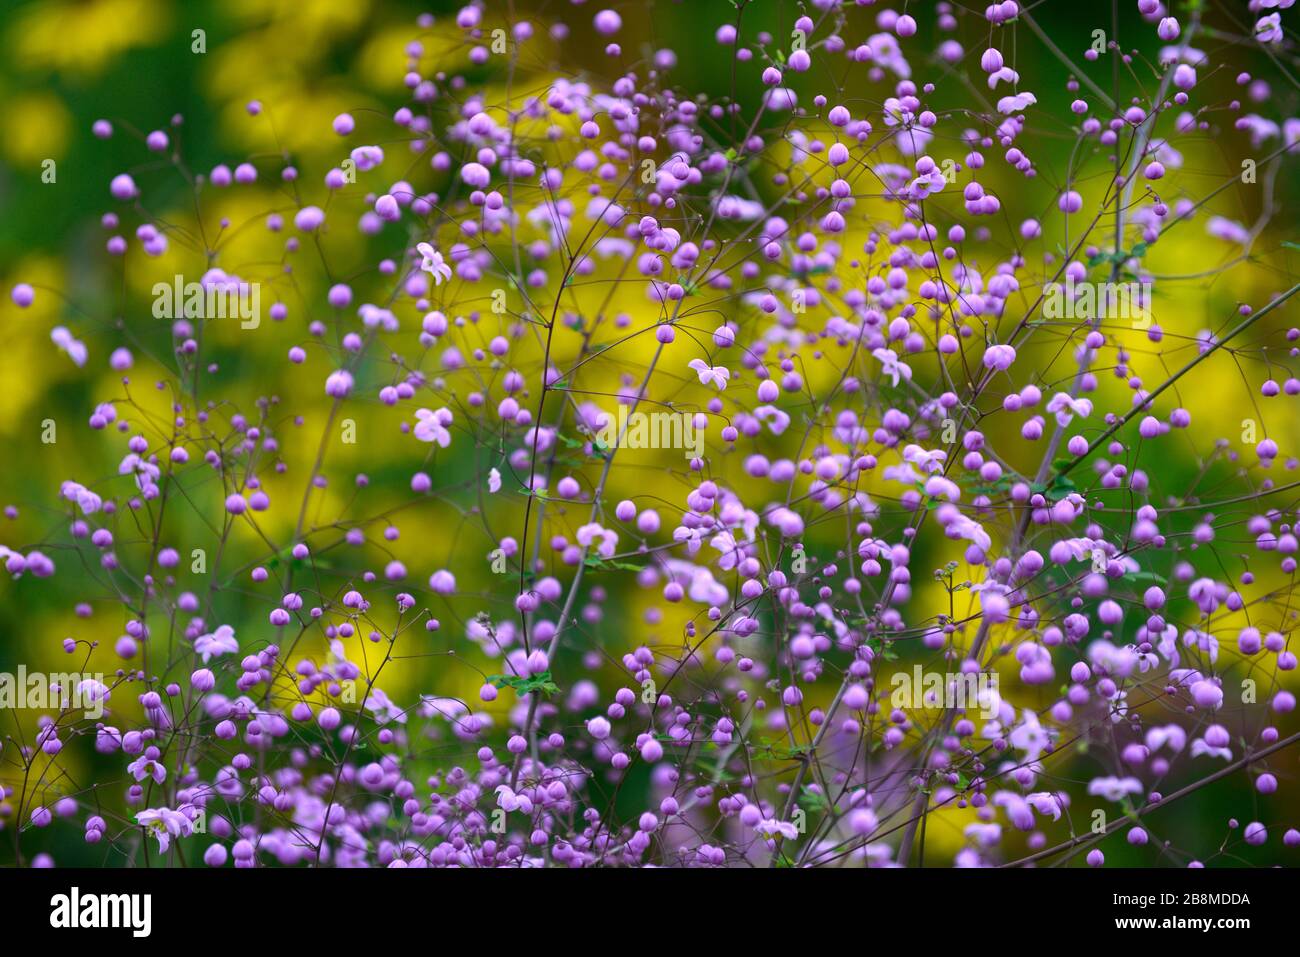 Thalictrum delavayi,meadow rue,purple,lilac,flower,flowerbuds,unopened,nearly open,flowers,flowering,perennial,yellow rudbeckia in background Stock Photo